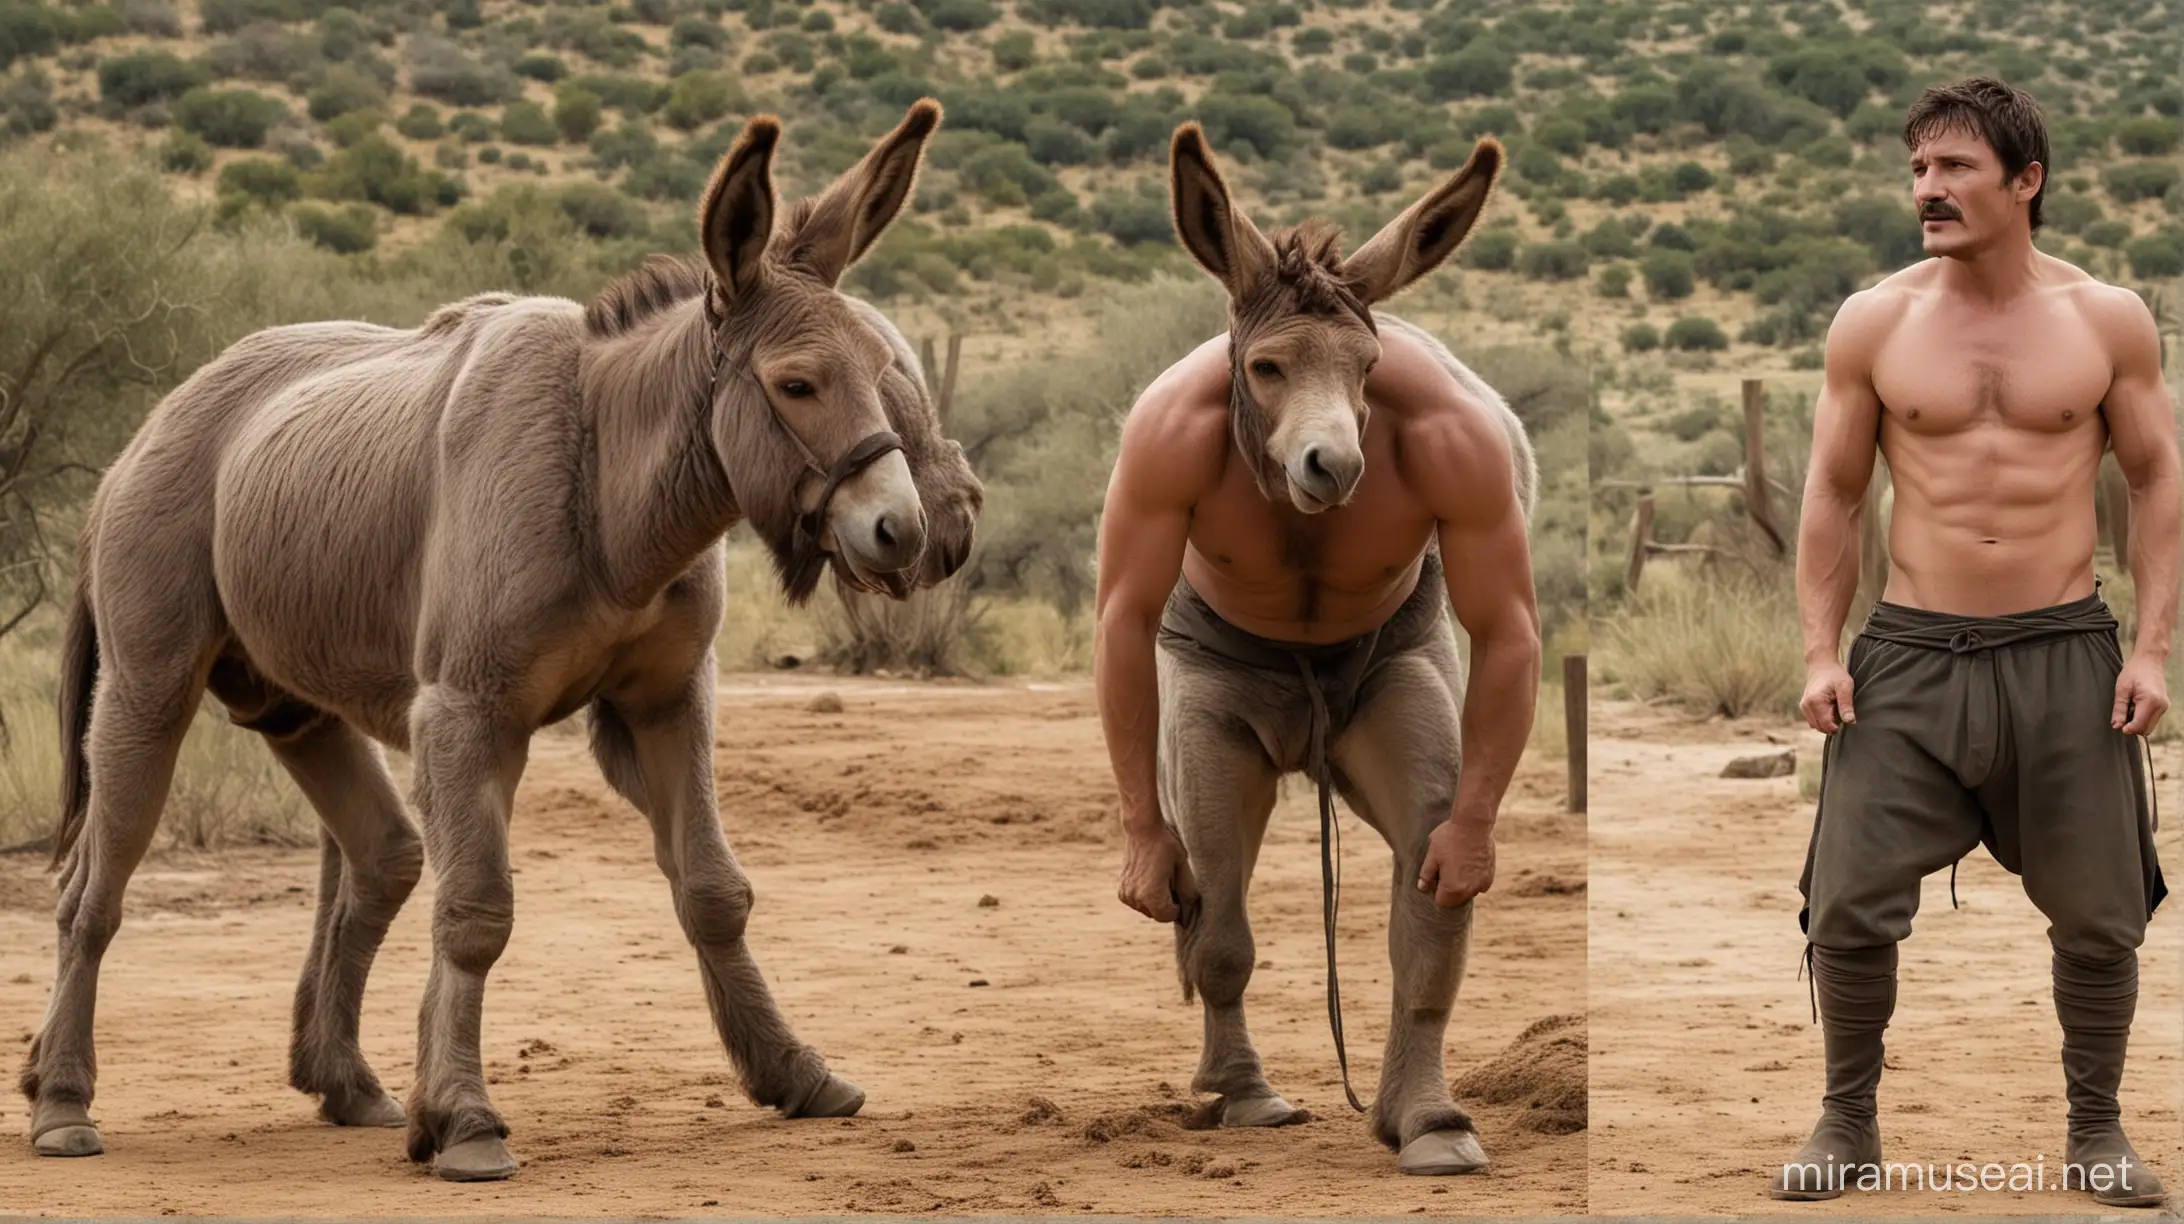 Pedro Pascal on all fours transforming into a donkey. He has donkey ears. He has donkey legs. He has donkey hooves. He has a donkey tail. He has a complete donkey body. And he's braying like a donkey. But his head is human.